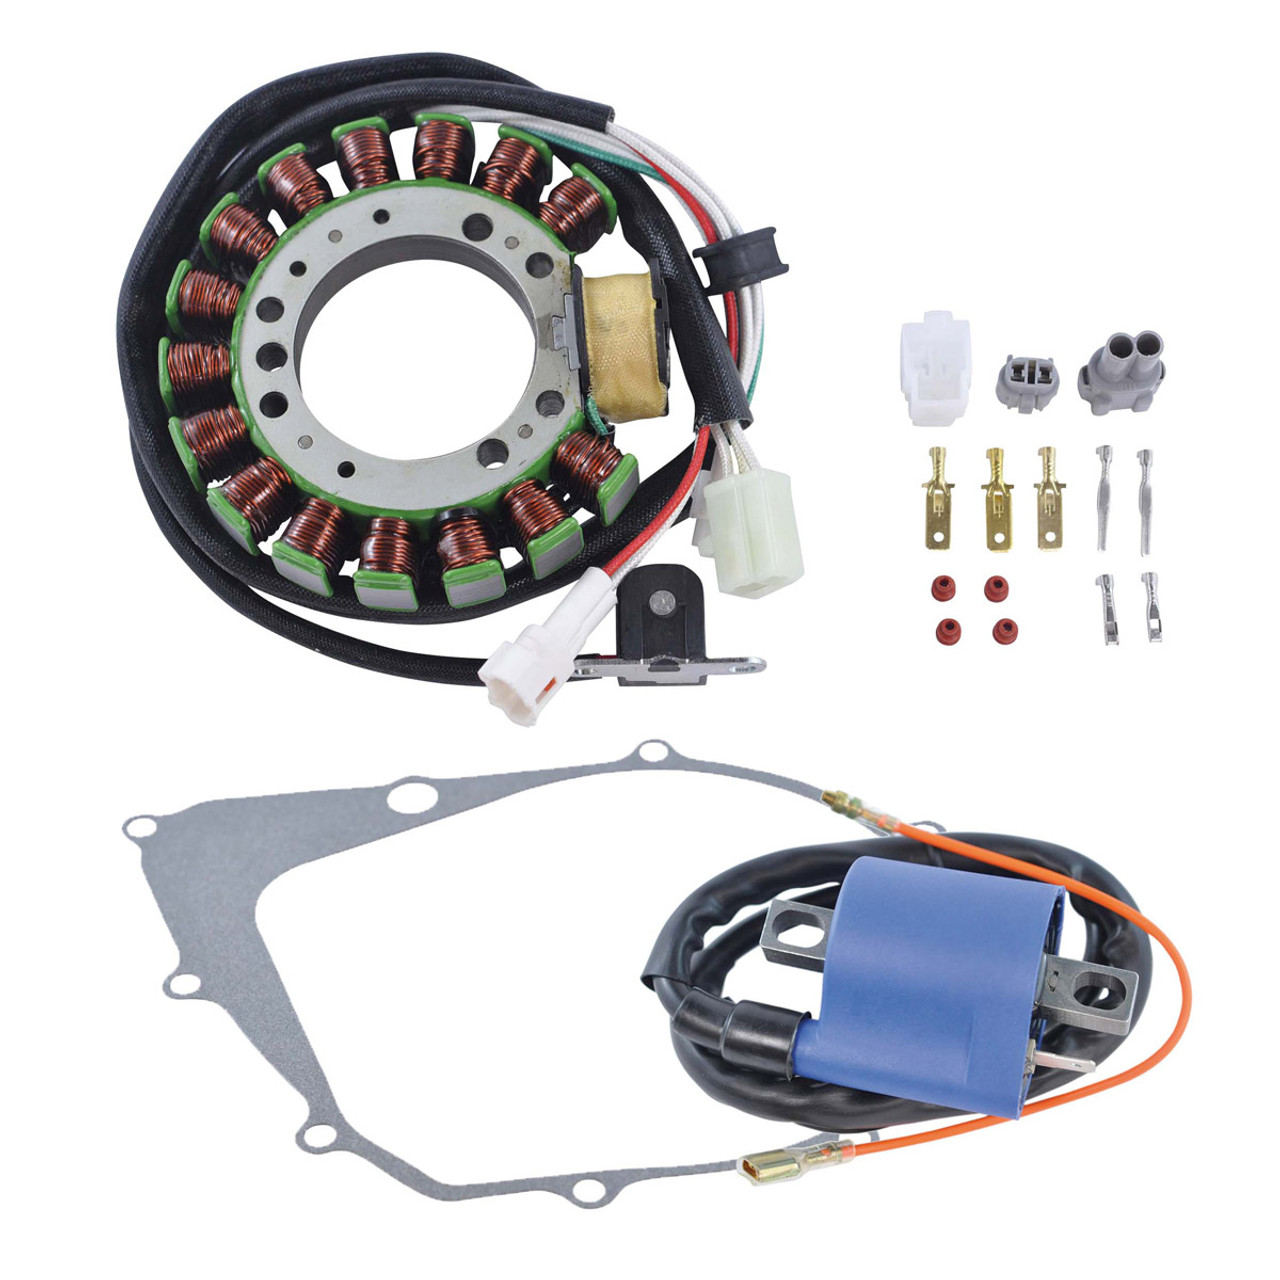 RMSTATOR New Aftermarket Yamaha Kit Stator + Crankcase Cover Gasket + Ignition Coil, RM22862